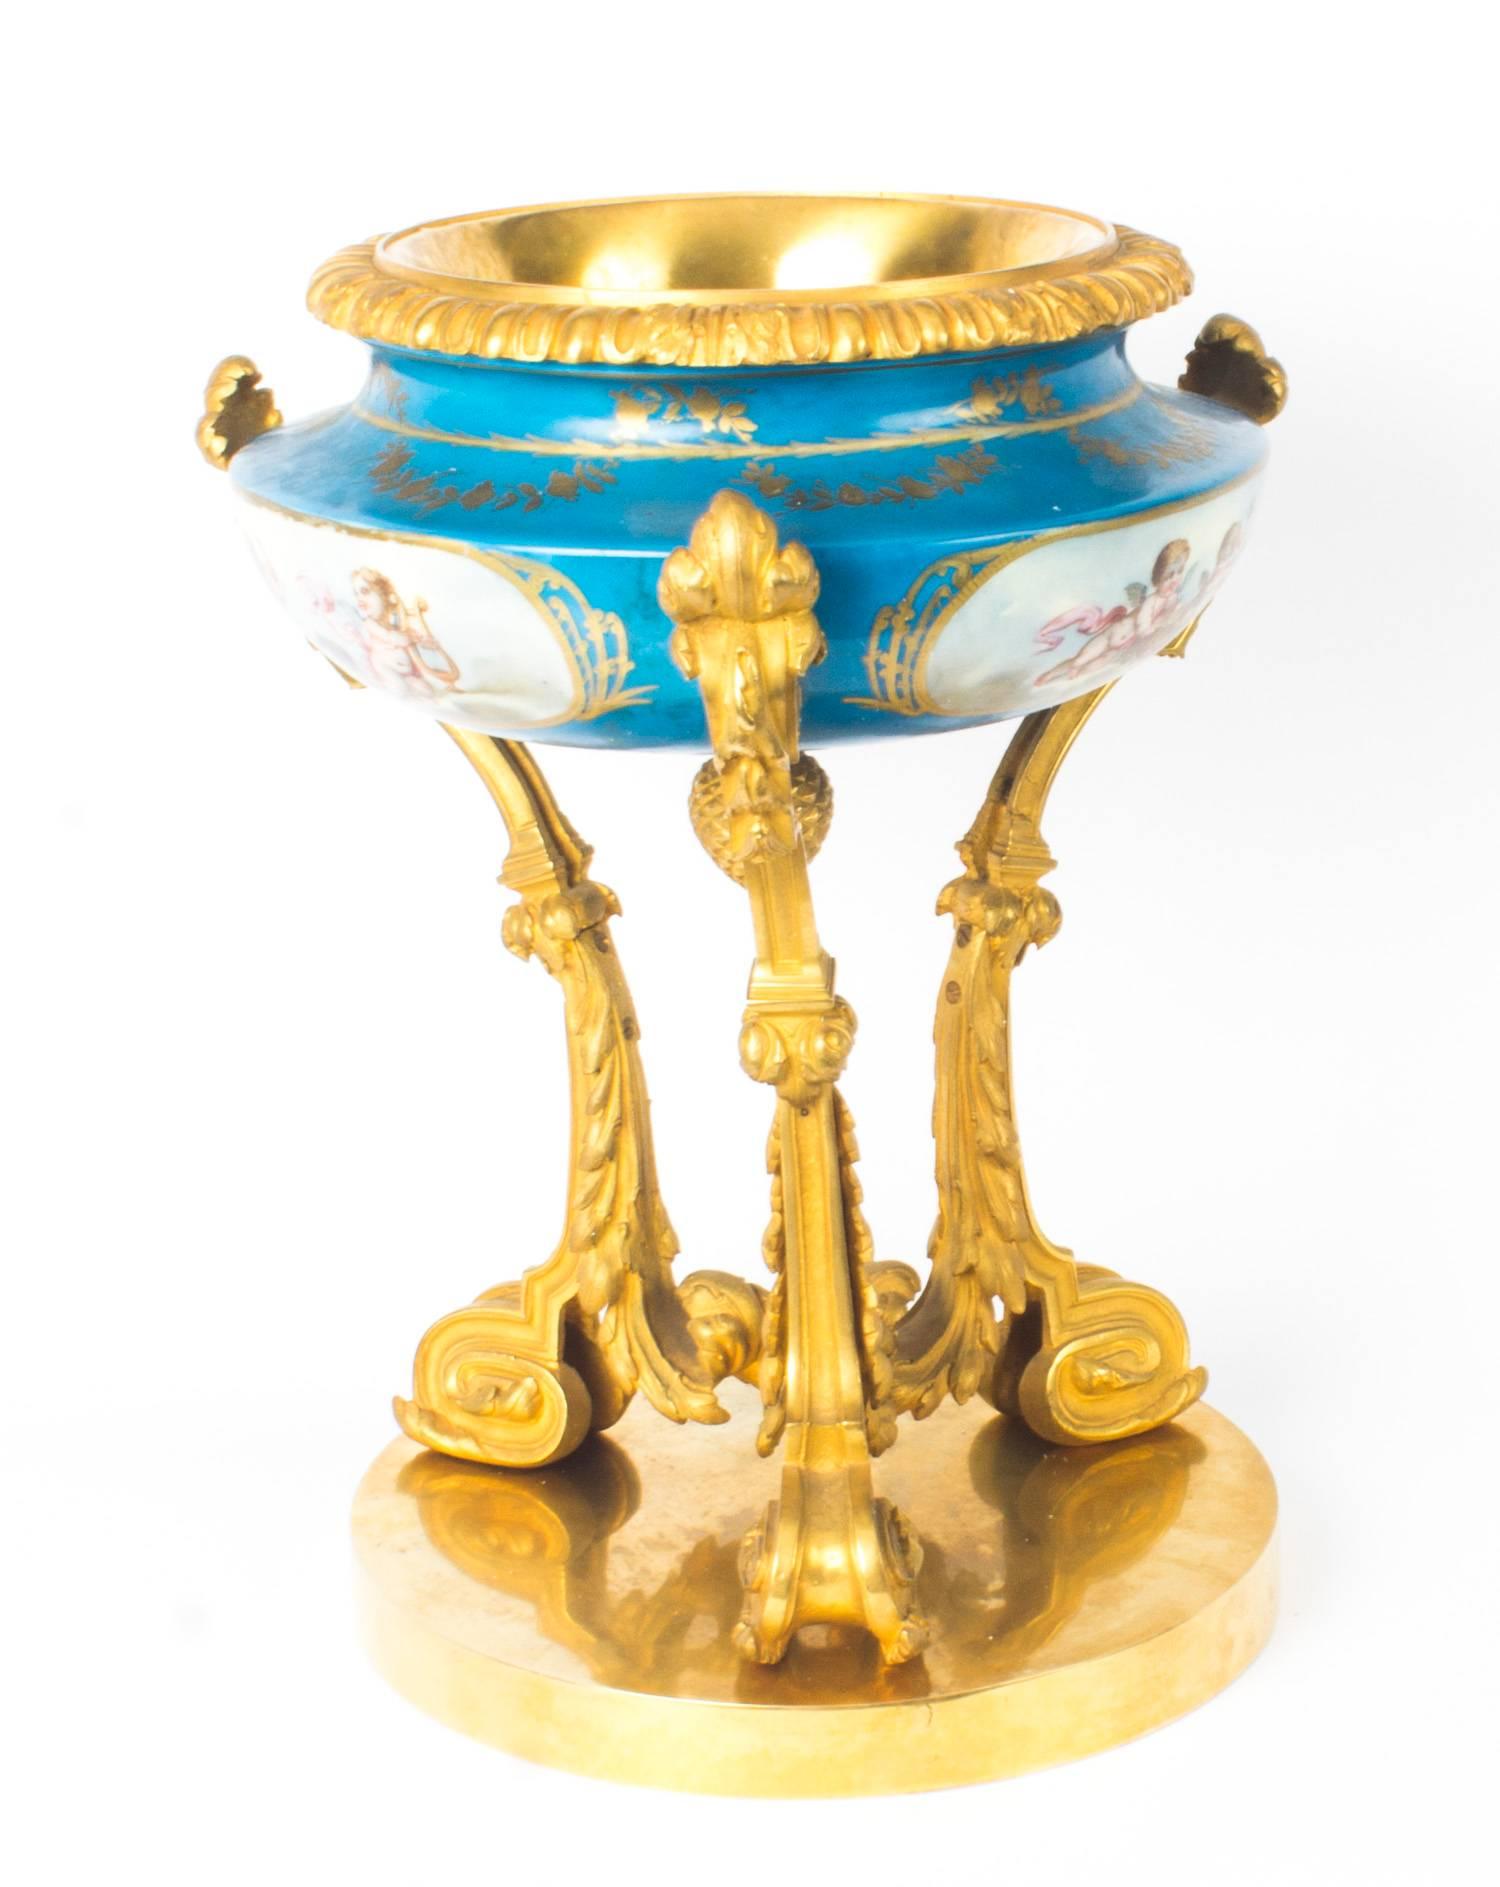 This is a fine antique French neoclassical 19th century gilt bronze and Sèvres Porcelain centrepiece, circa 1860 in-date.
 
The centrepiece is inset with a hand-painted Sèvres Porcelain bowl that features three panels depicting twin cherubs on a